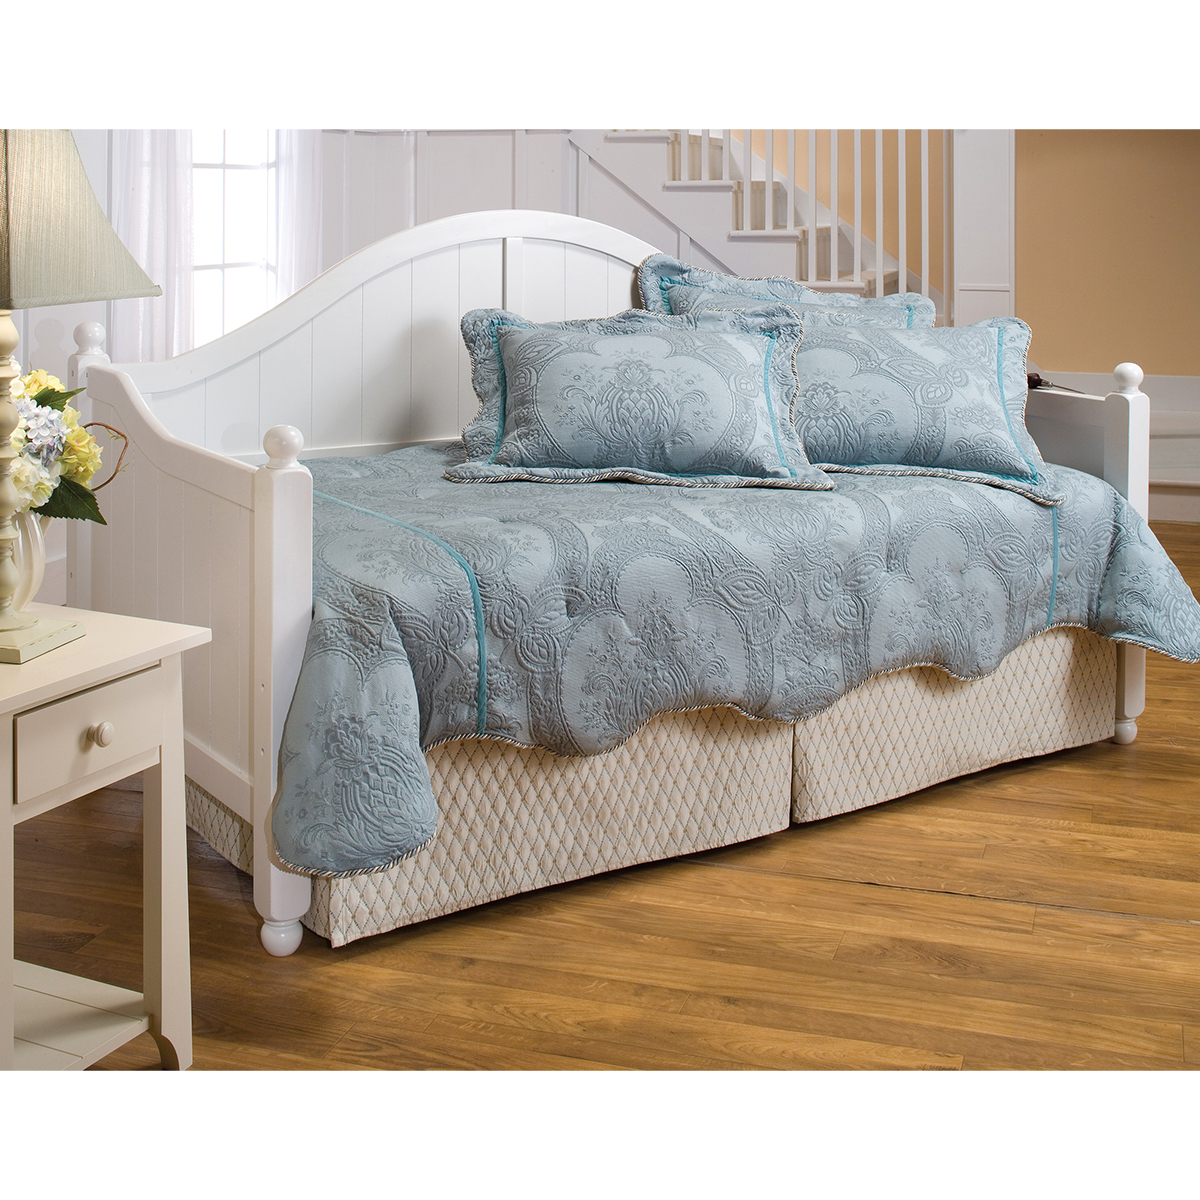 Hillsdale Furniture Augusta Daybed Sides - White